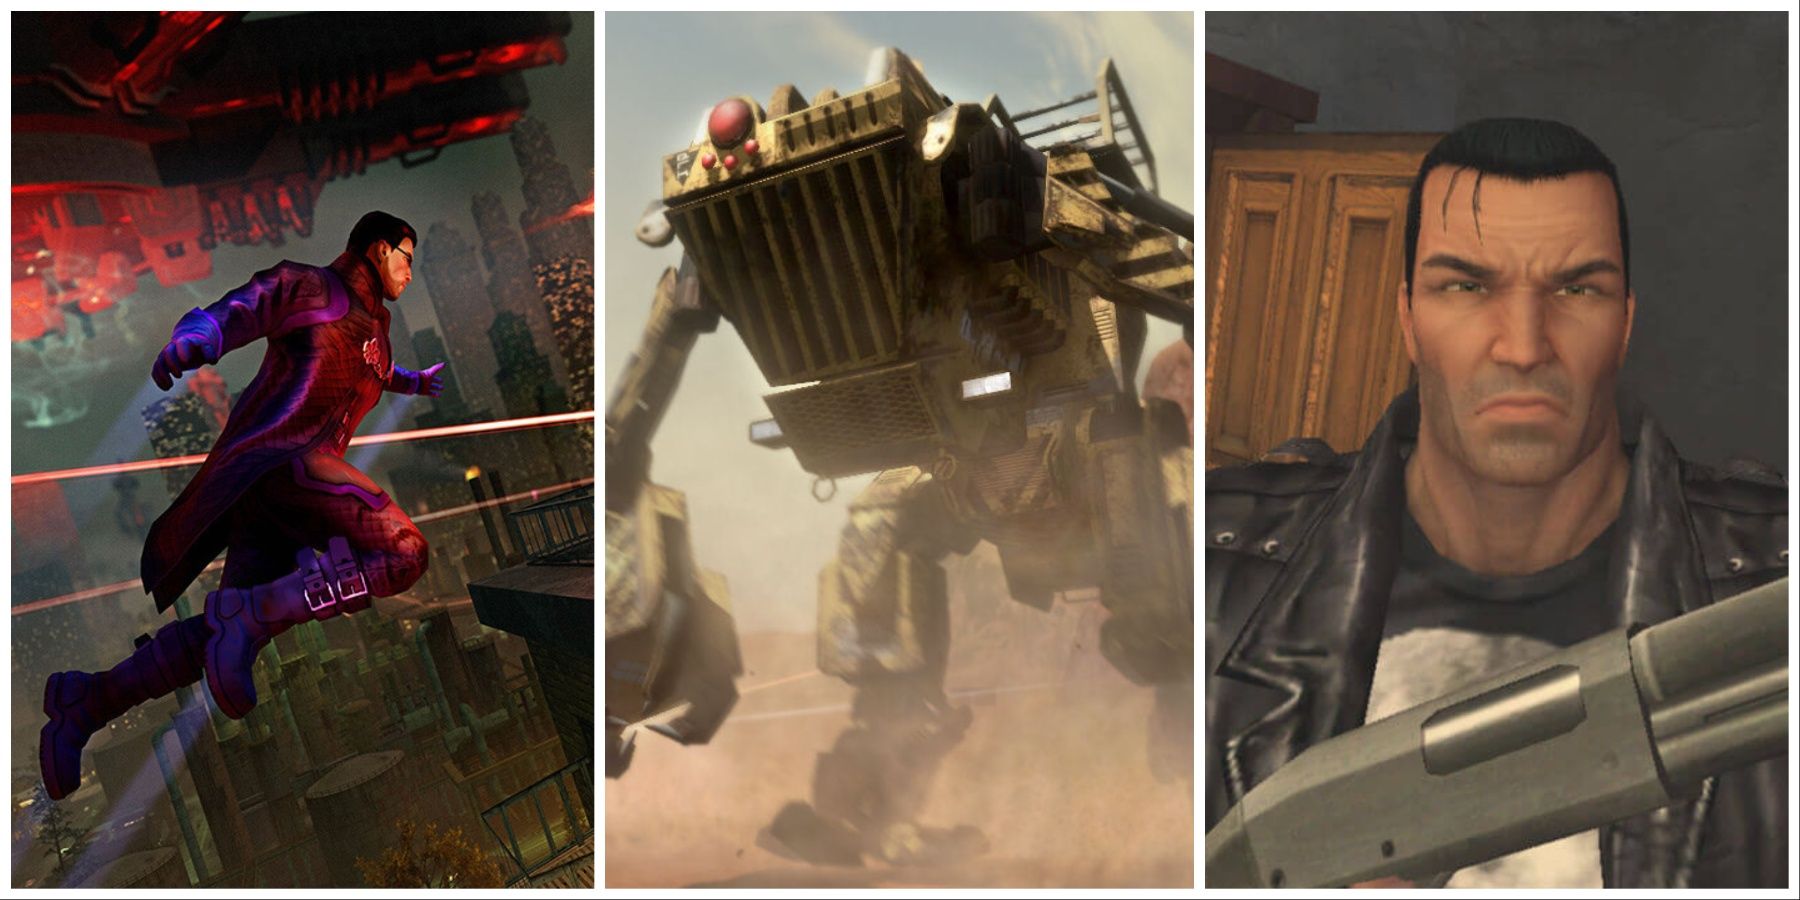 Featured image of Volition games like Saints Row 4, Red Faction Guerrilla, and The Punisher